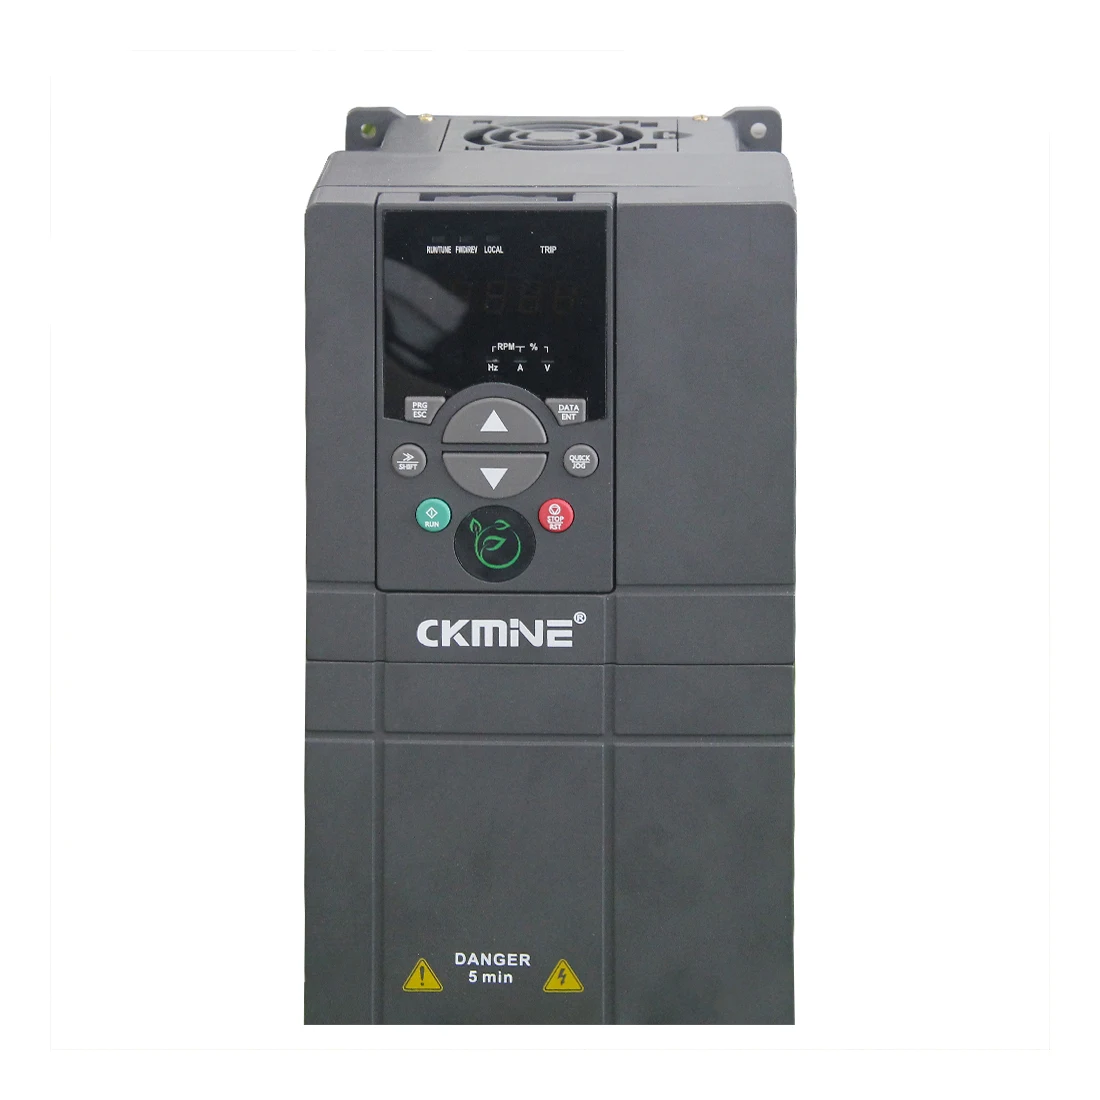 CKMINE Versatile Use 3 Phase 380V AC 0.75kW 500W Low Power VFD Inverter Converters Variable Frequency Drive